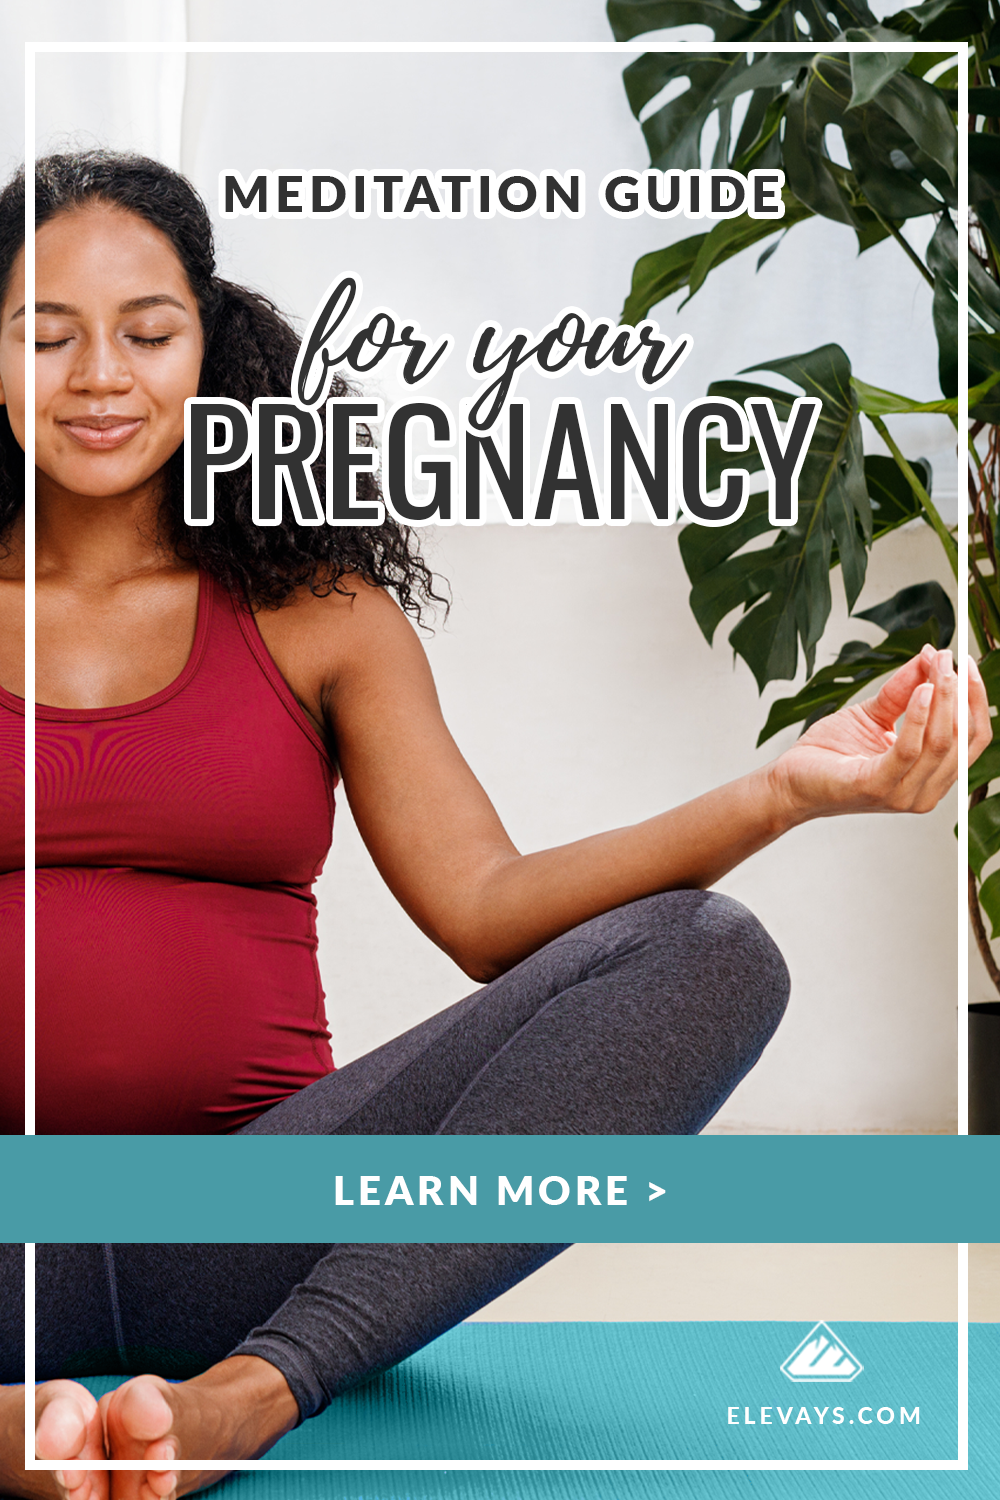 Your Guide on How to Meditate During Your Pregnancy